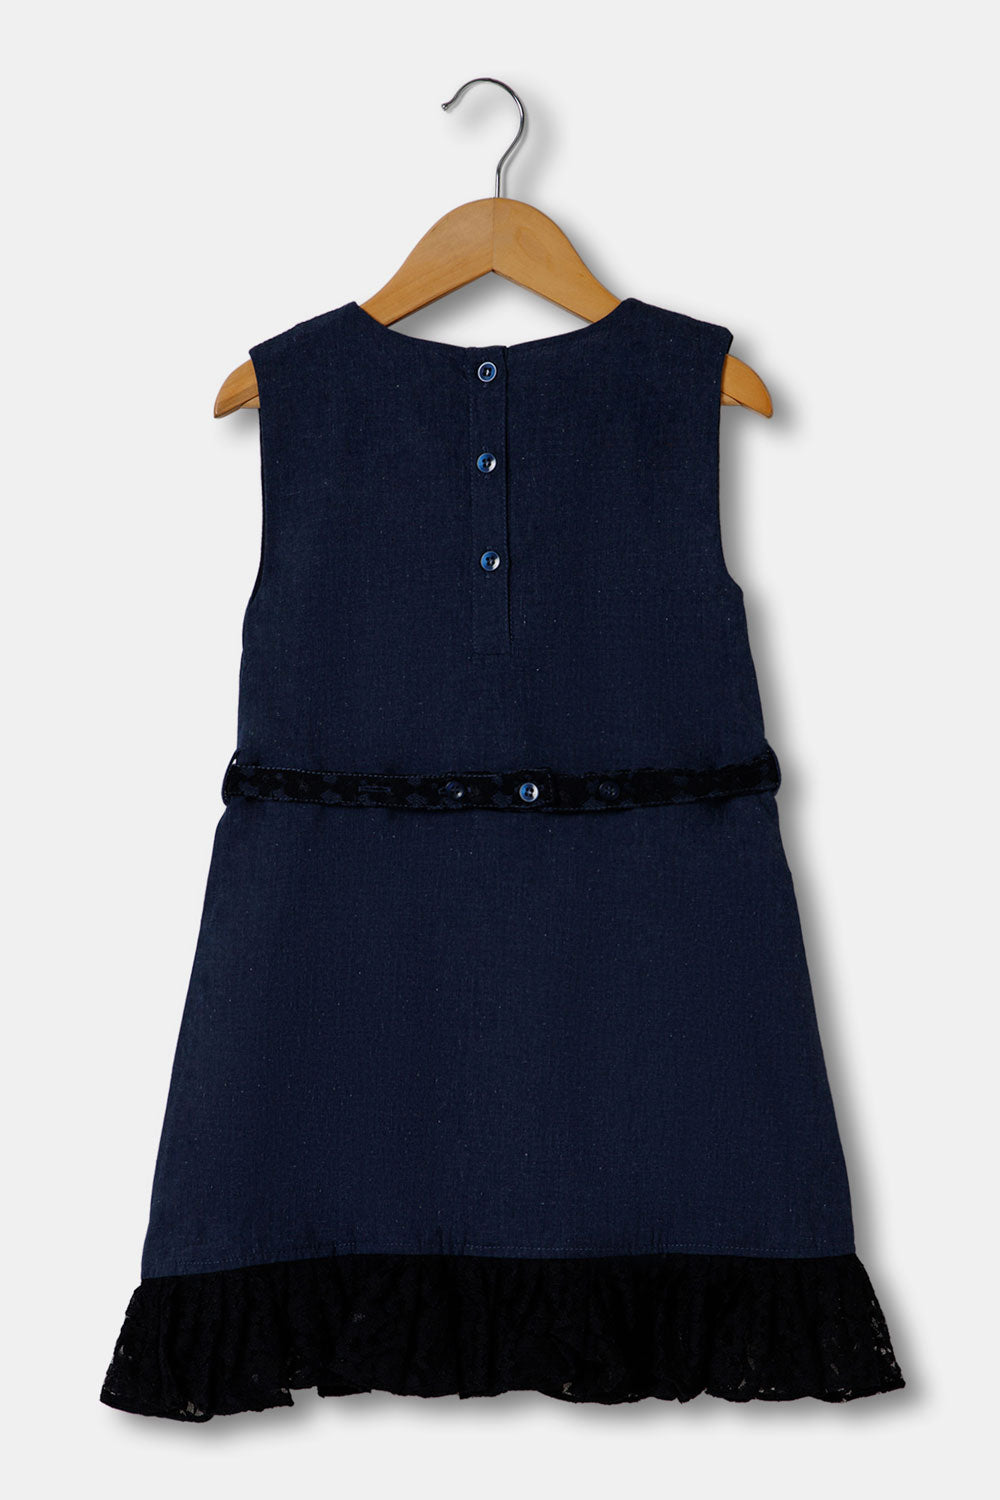 The Young Future Back Open  Girls Western Wear  - Navy  - DR09